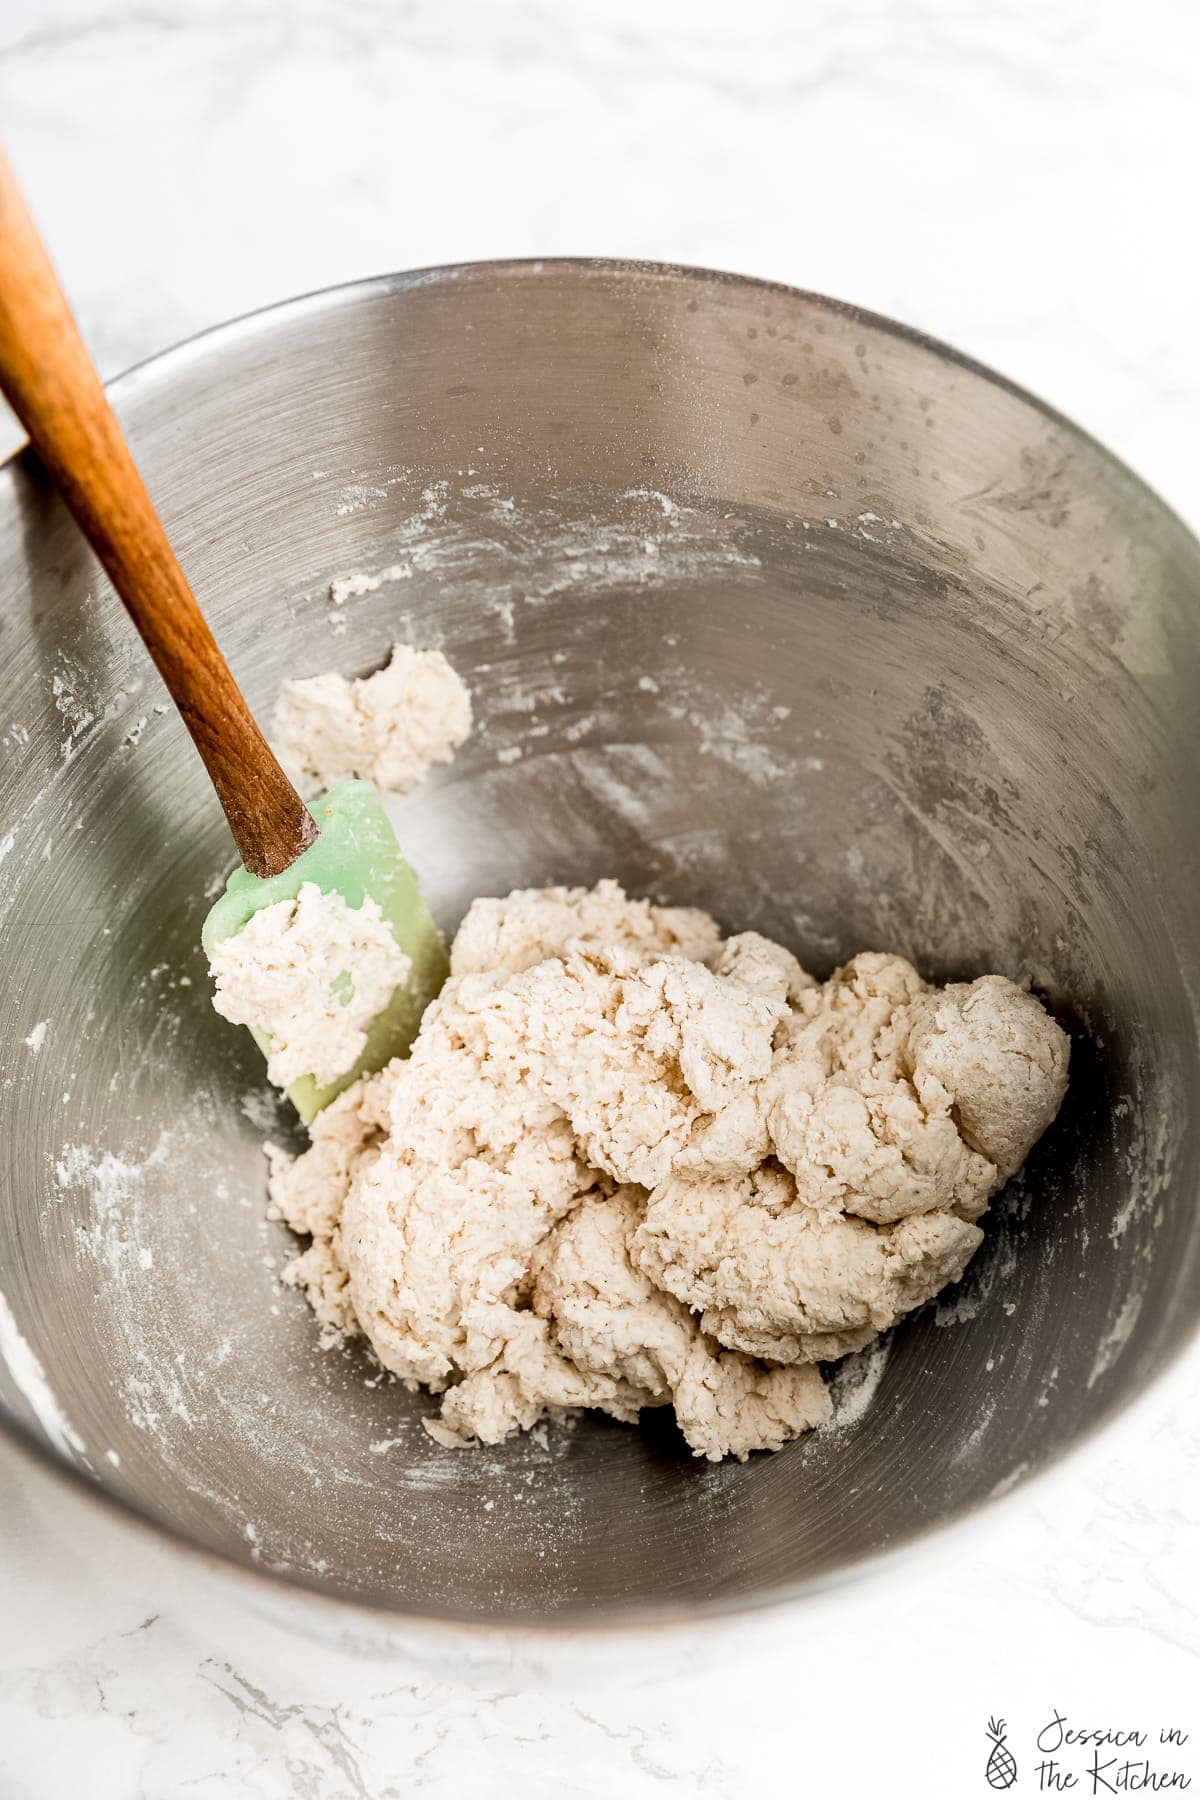 Dough being mixed in a bowl.